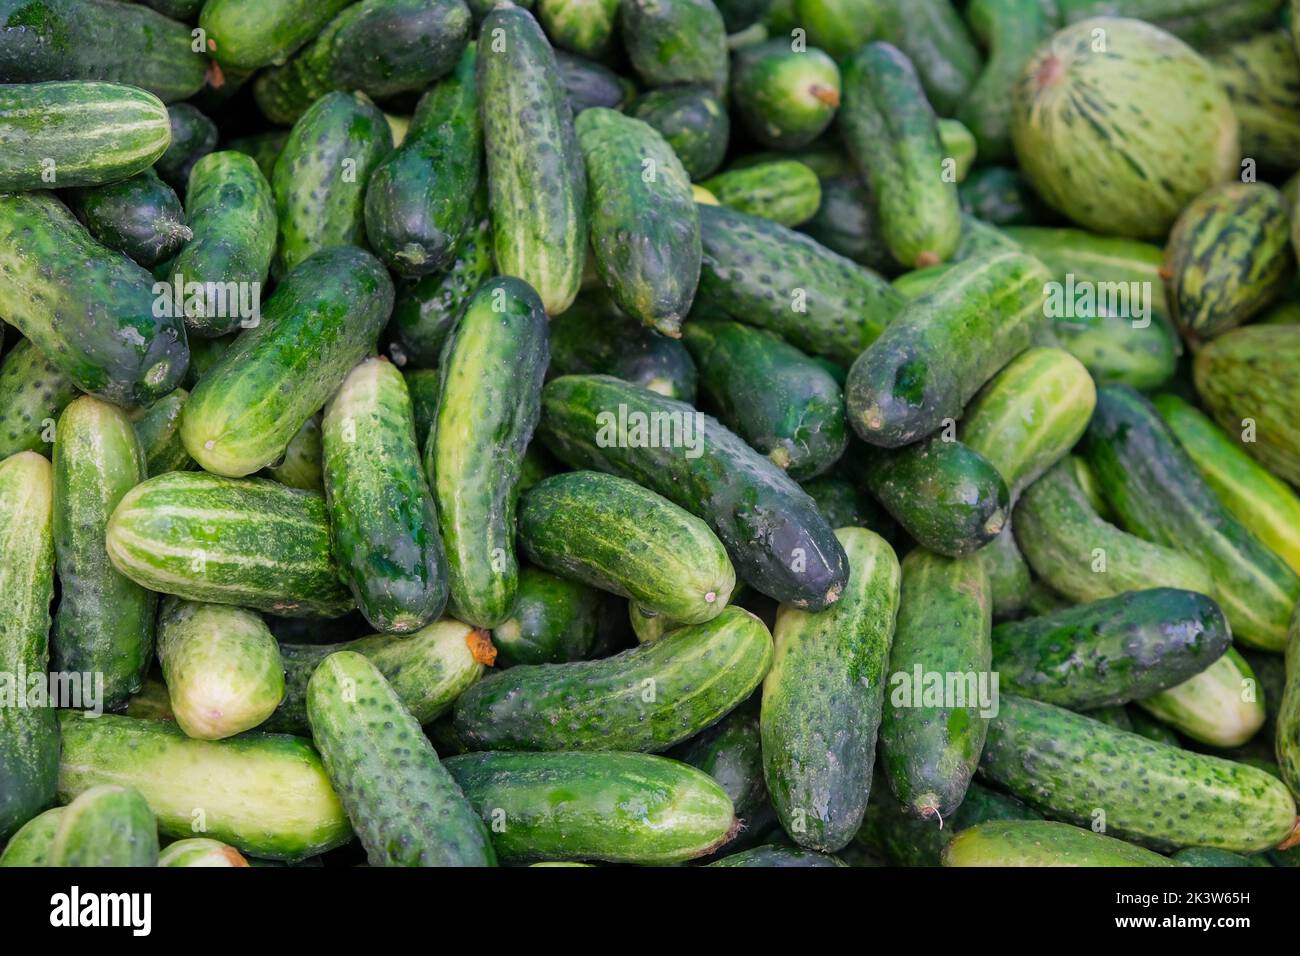 Top view of organic green cucumbers at the market. Food concept, copy space. Stock Photo